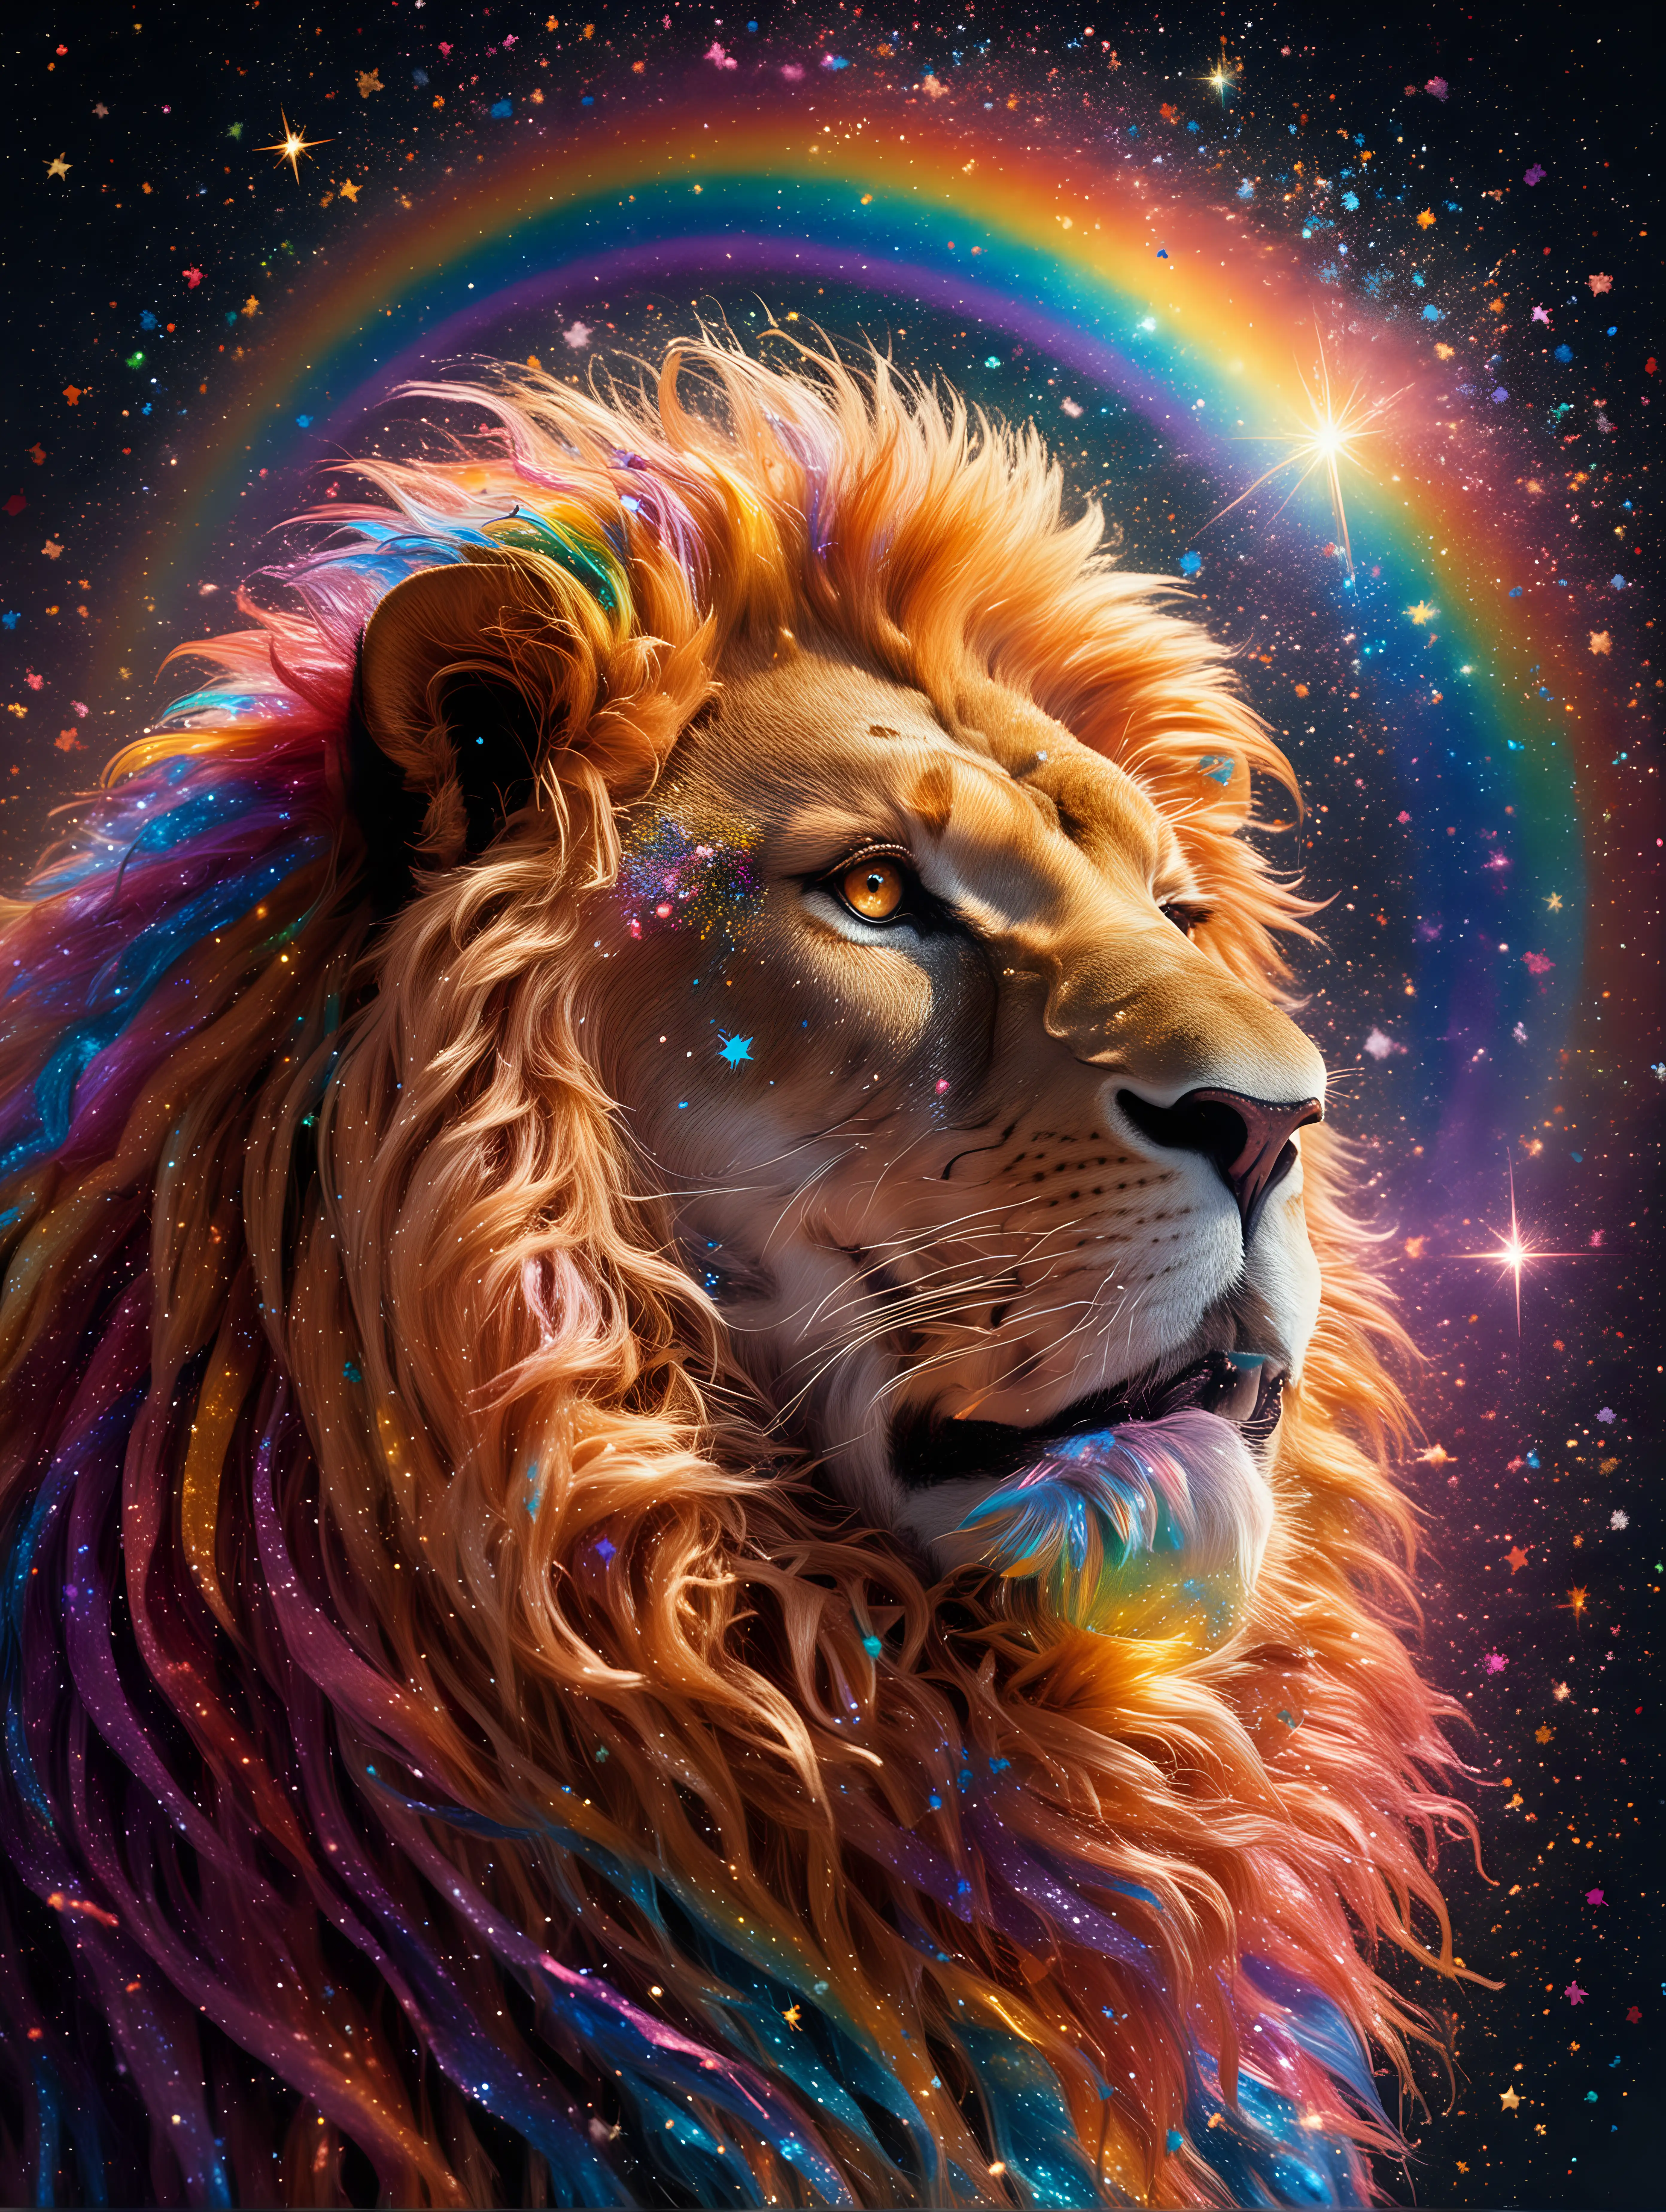 Majestic Lion Bathed in Rainbow Glitter Under Starry Sky